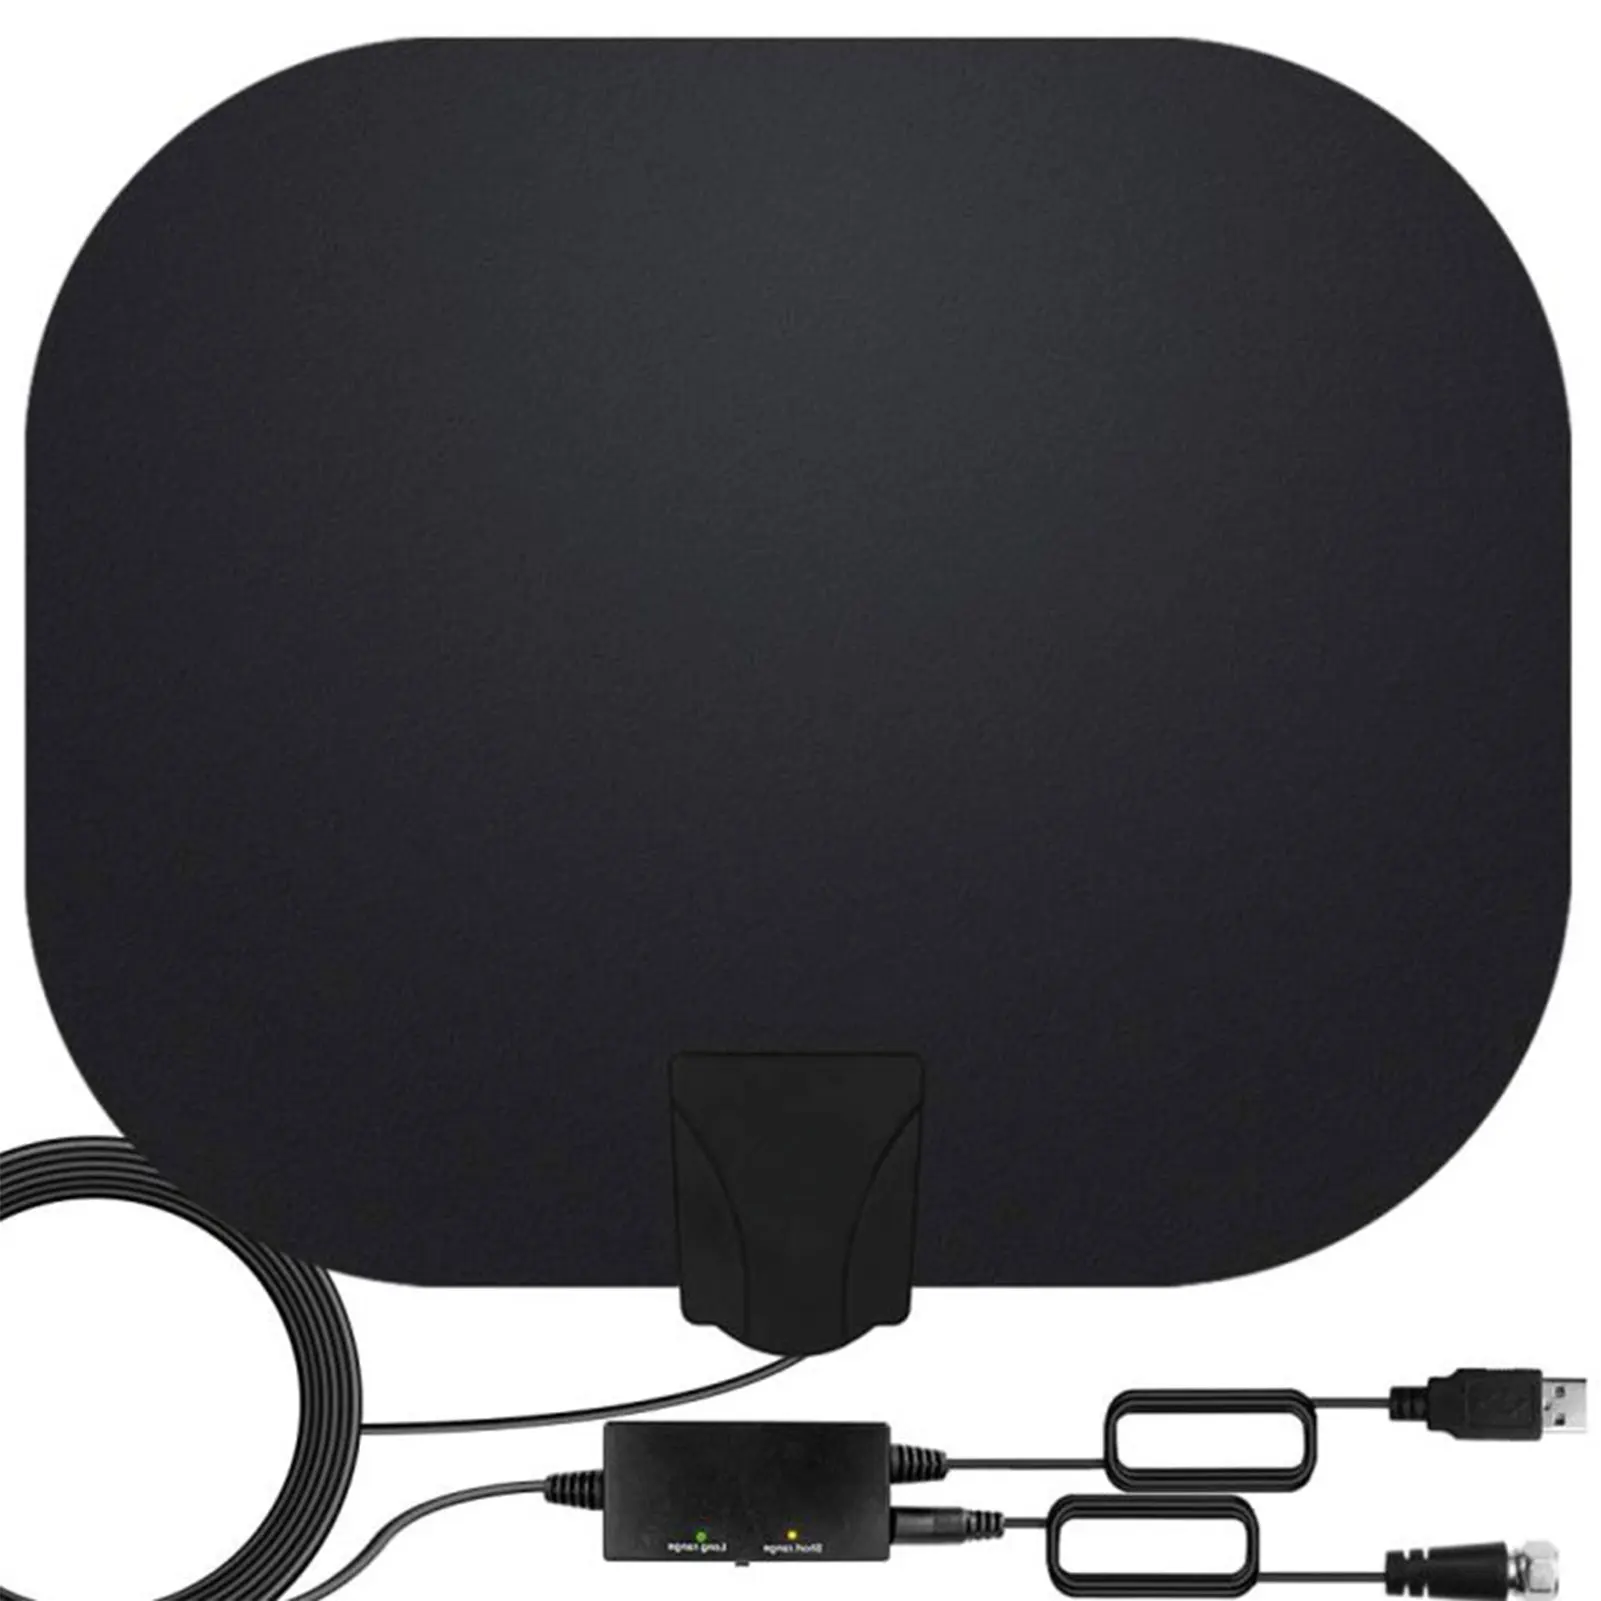 

2021 Smart TV Antenna Indoor HD Digital 4K 1080p Coaxial Cable Amplified HDTV 4K DVB-T2 Freeview Isdb-tb Local Channel Broadcast